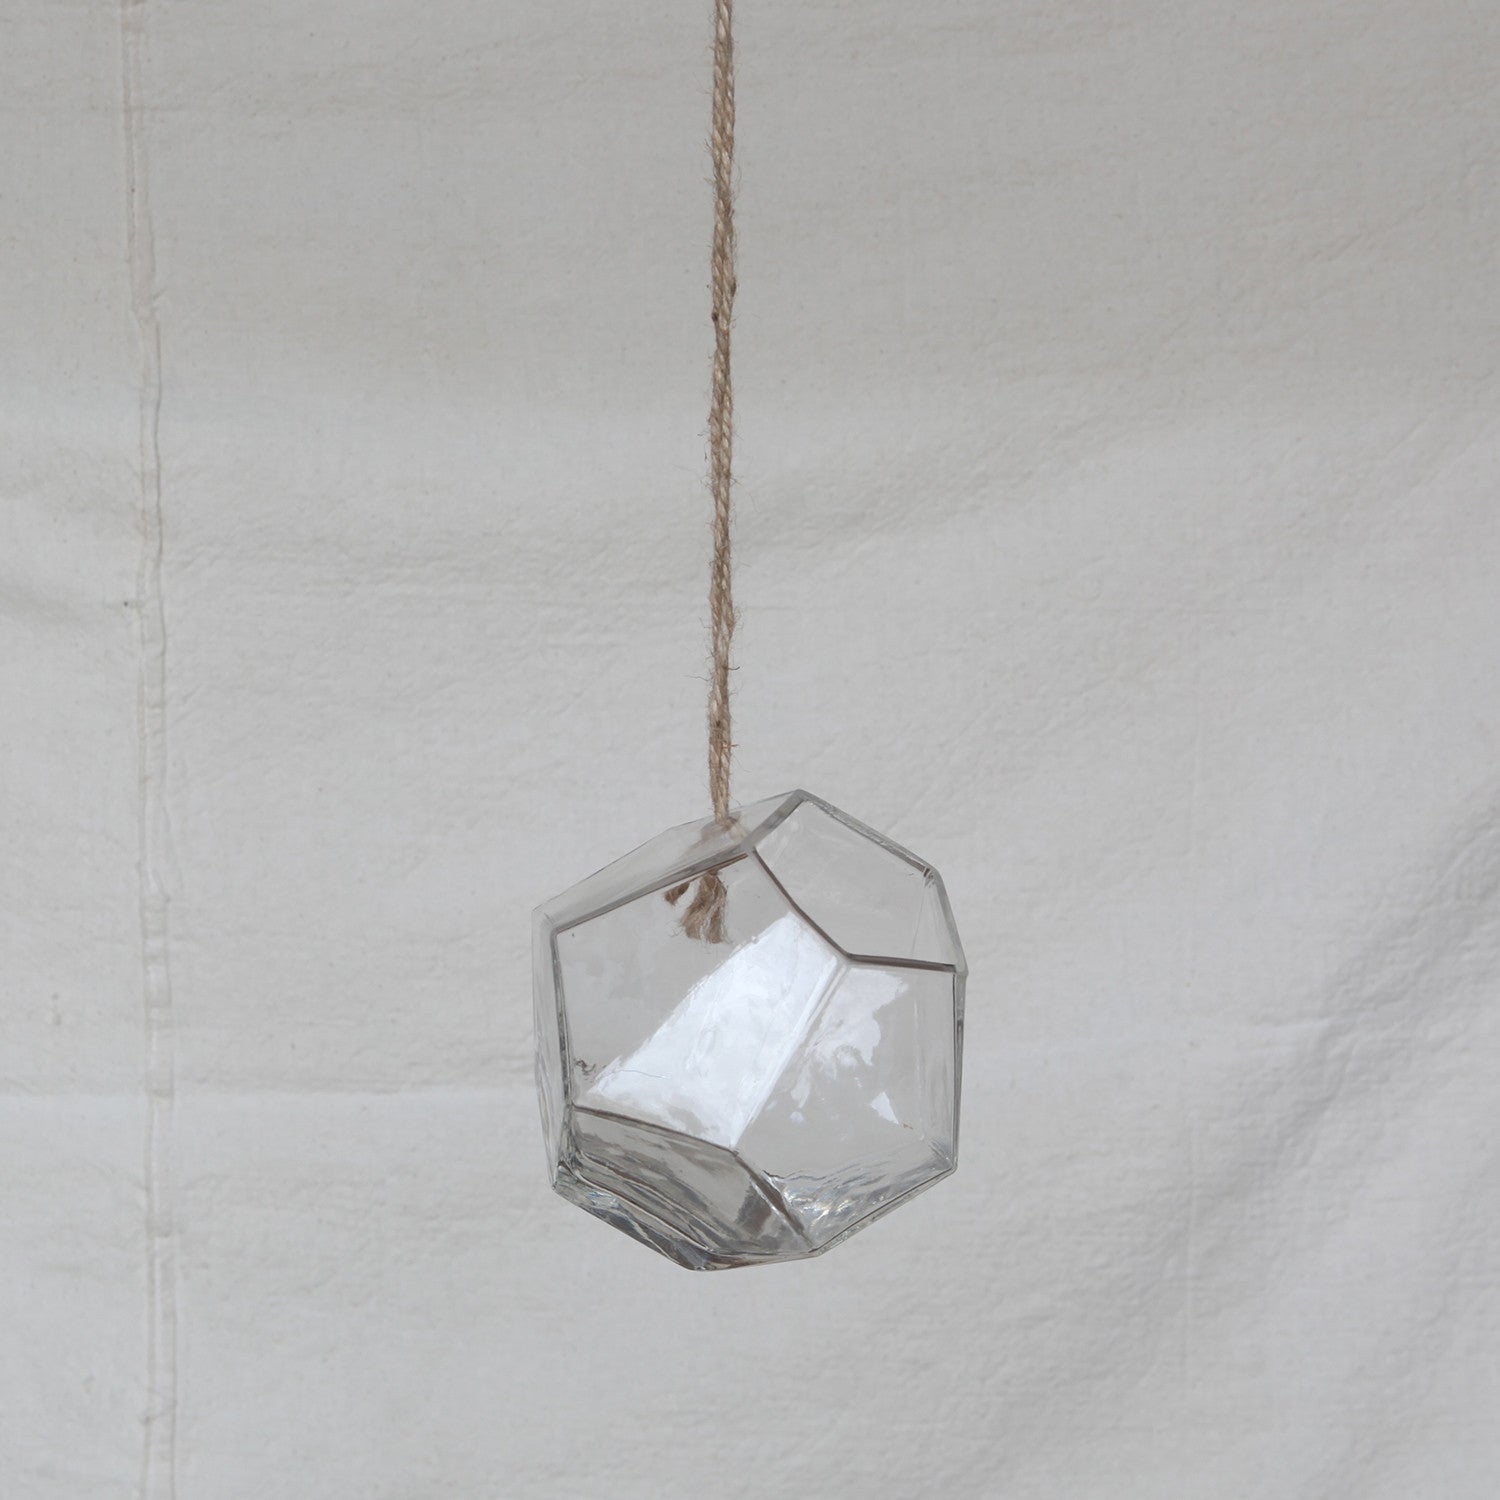 Hanging Dodecahedron Vase